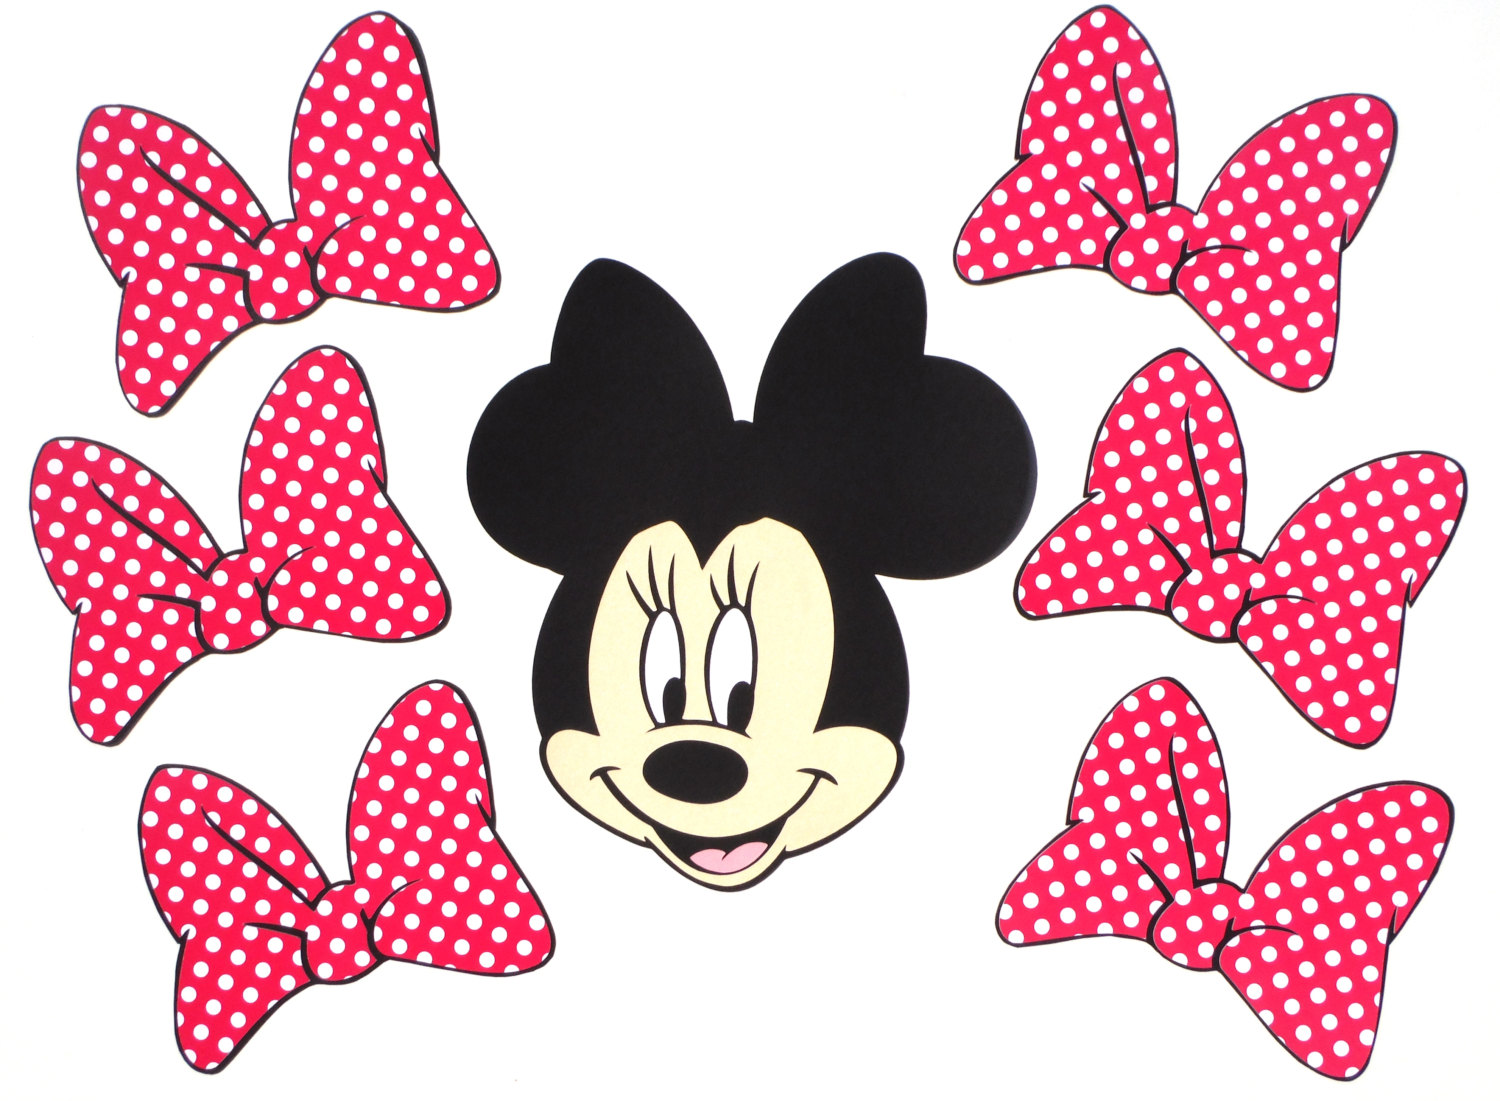 8 Best Images of Minnie Mouse Bow Printable - Minnie Mouse Bow ...